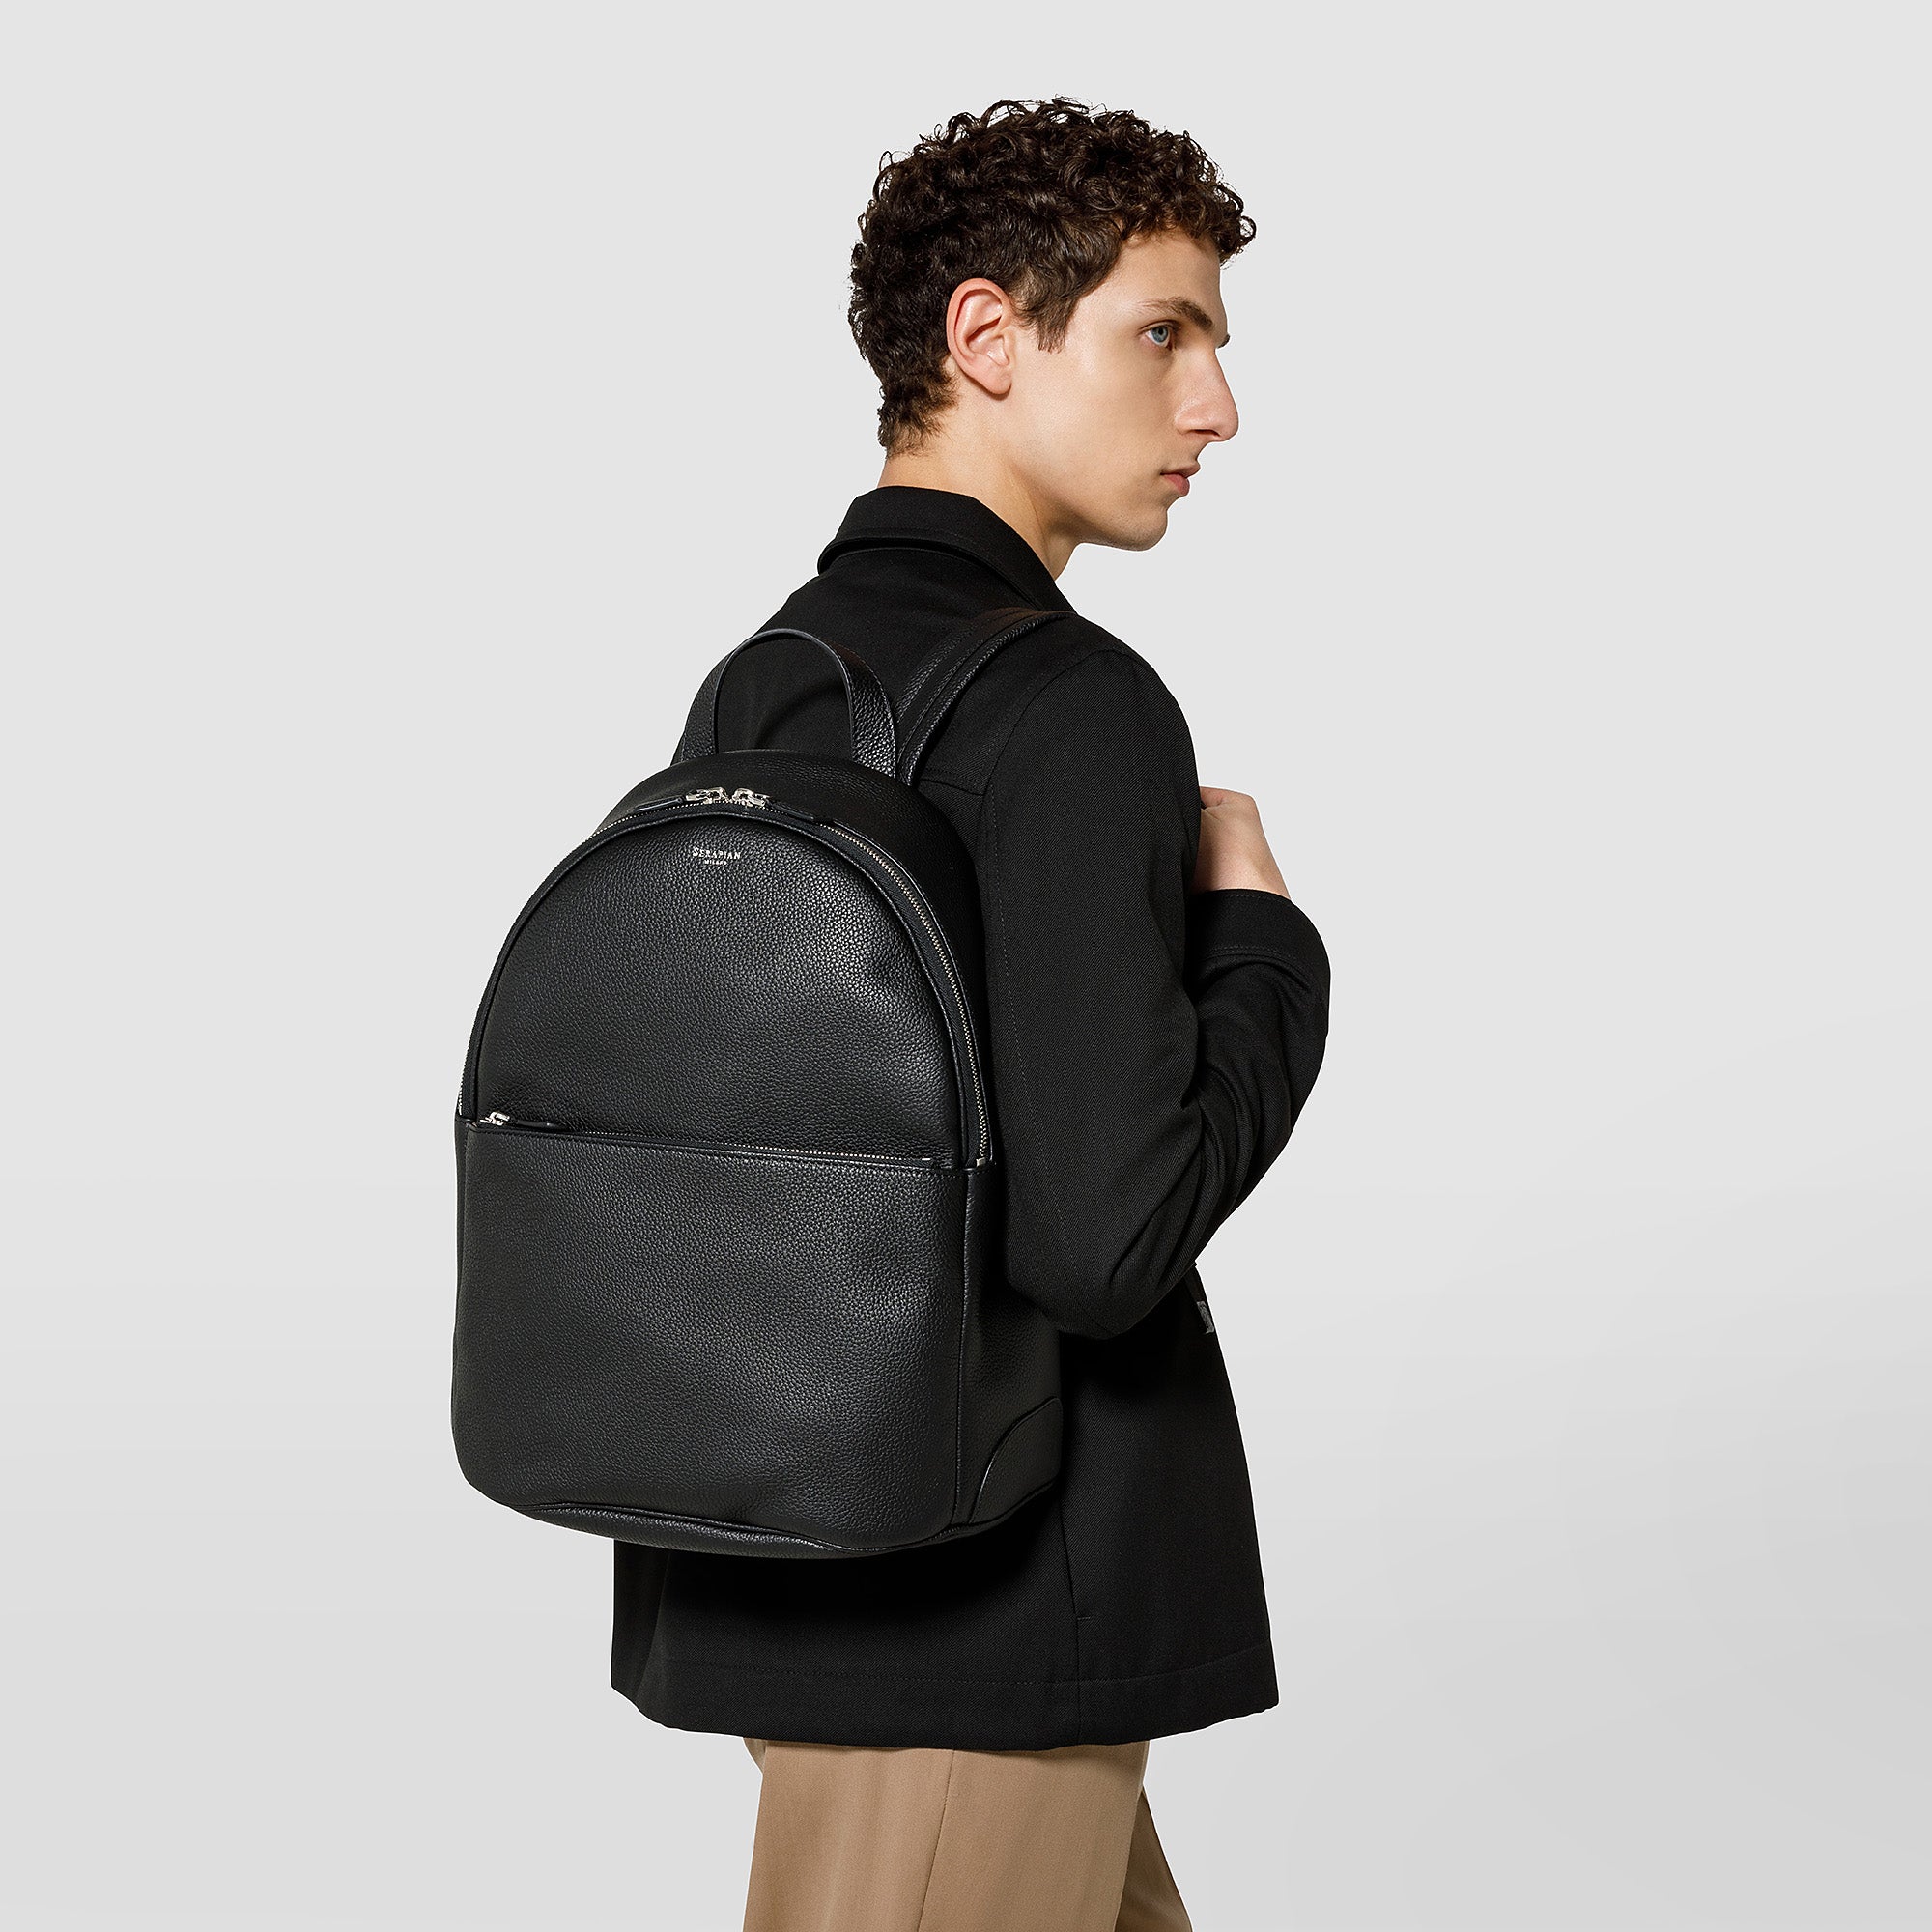 Backpack in cachemire leather black – Serapian Boutique Online